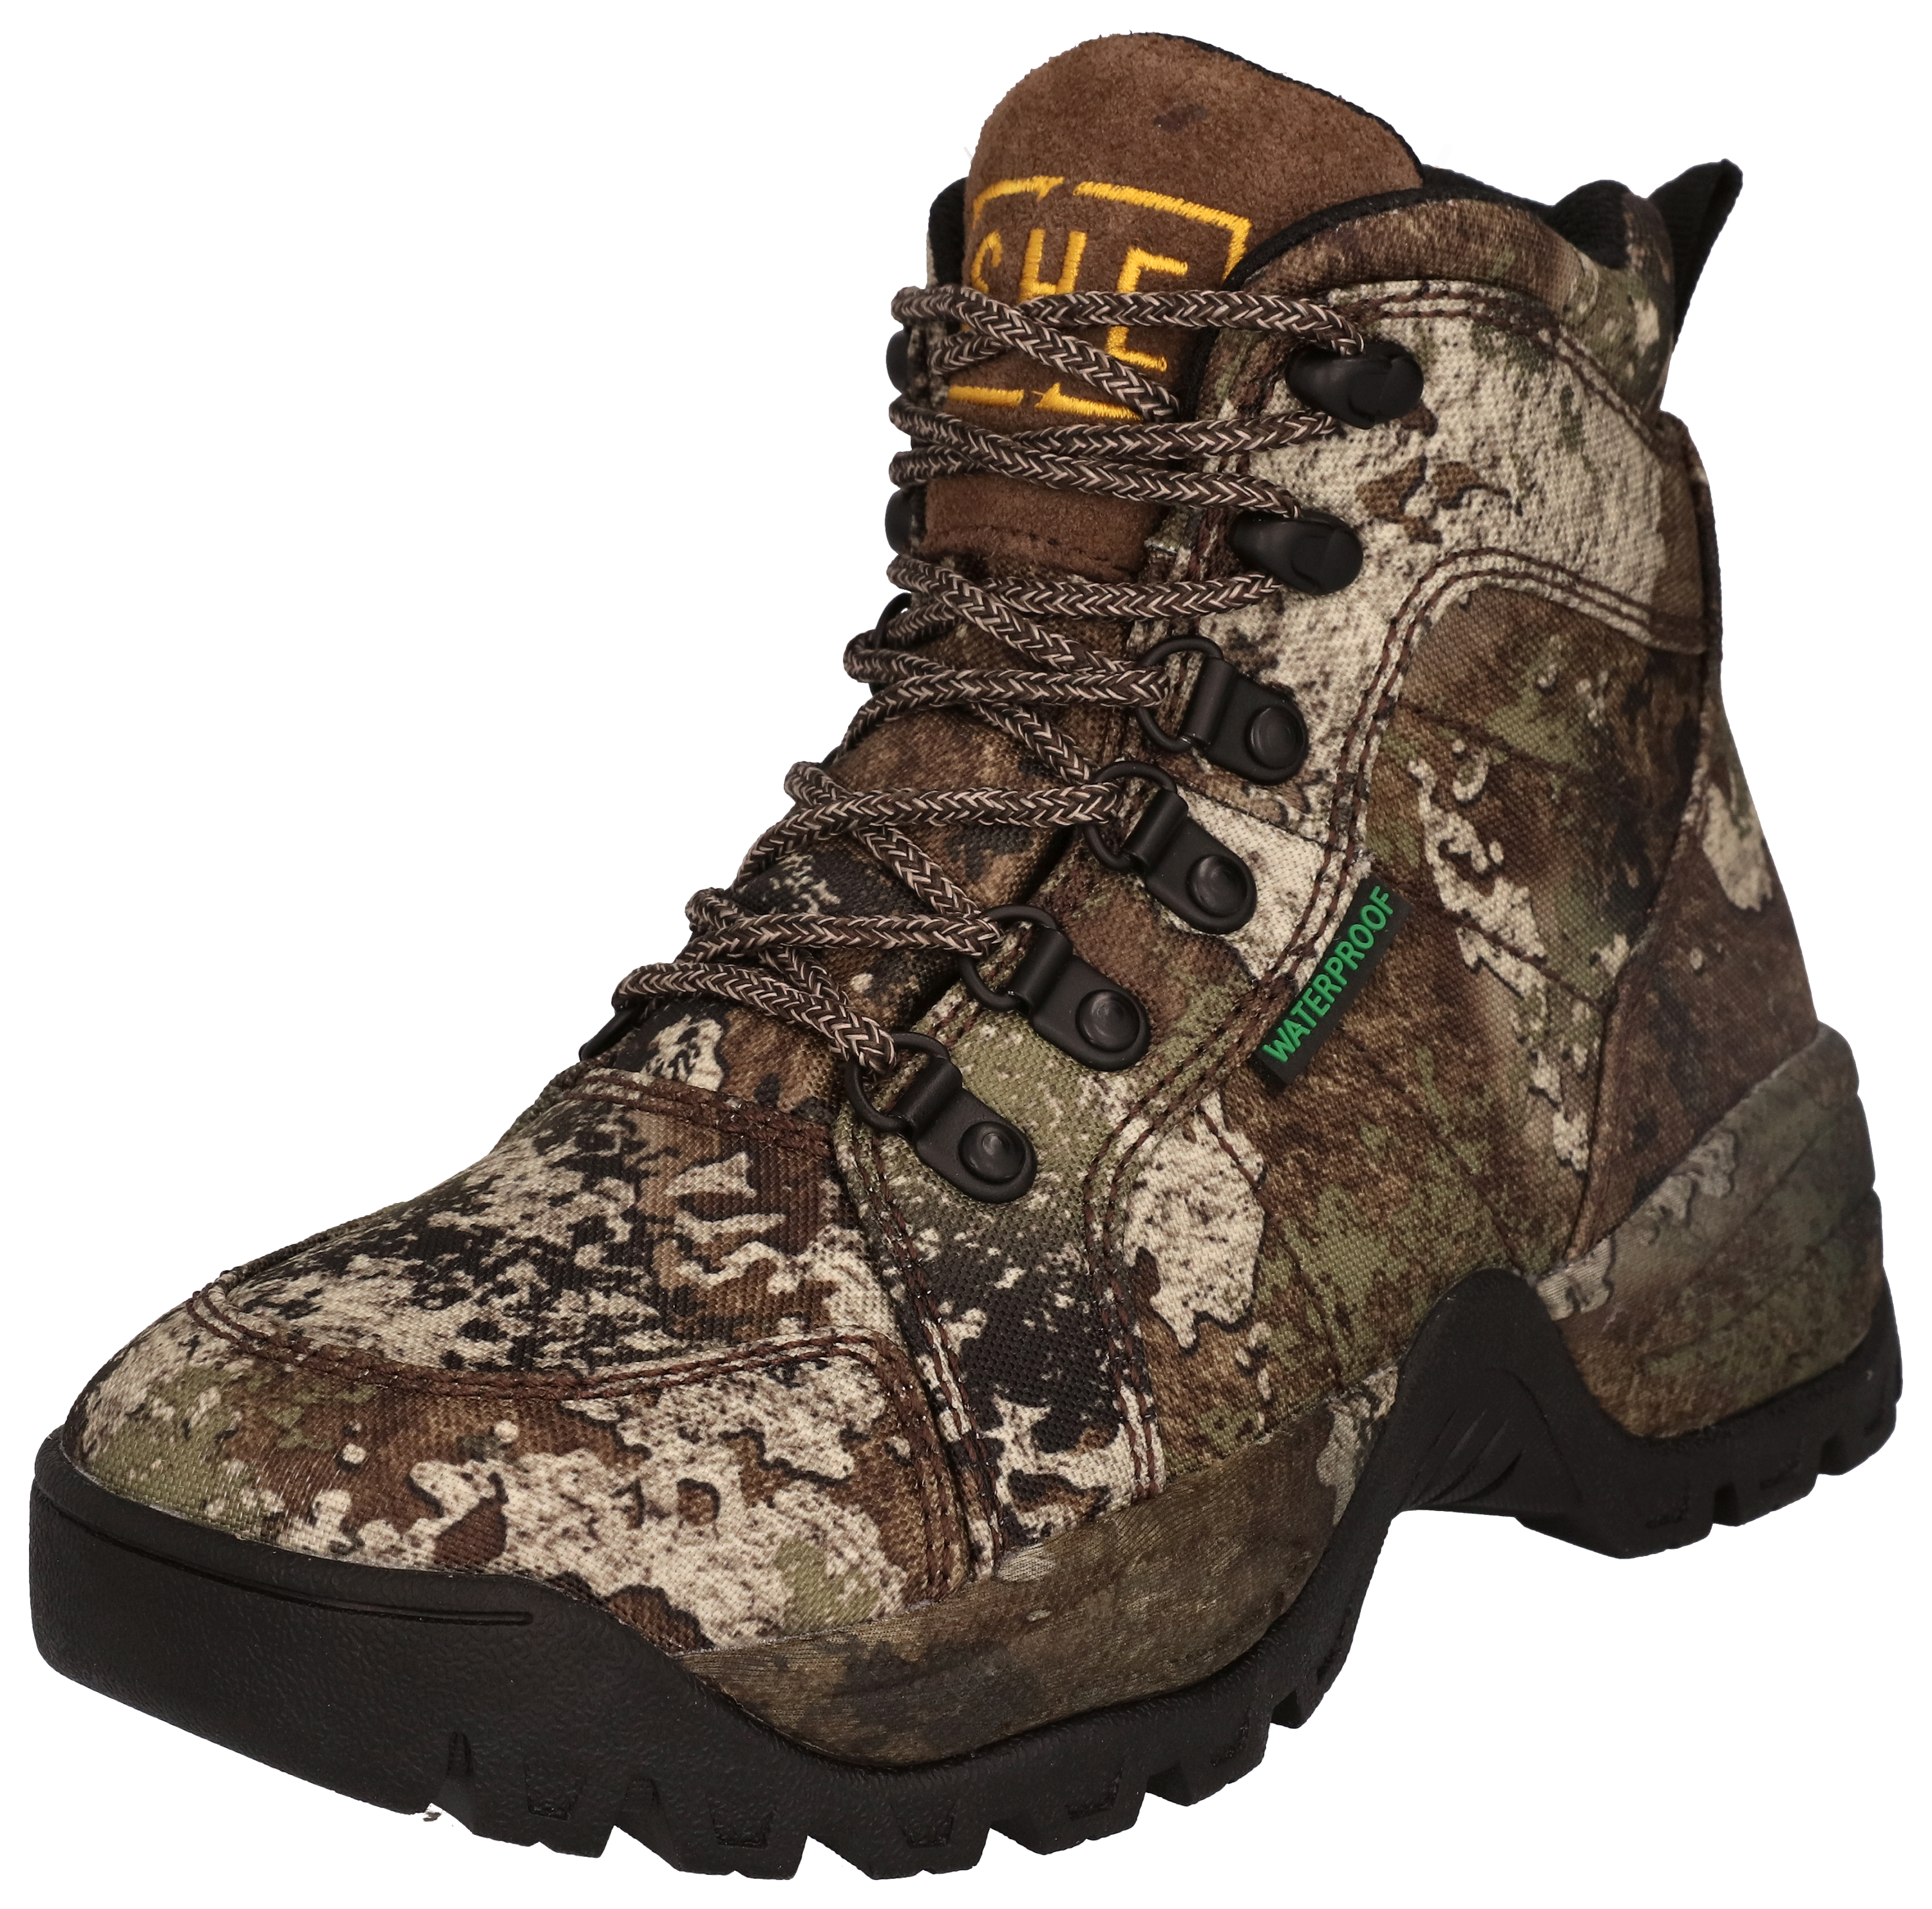 SHE Outdoor Timber Buck Waterproof Hunting Boots for Ladies - TrueTimber Strata - 11M